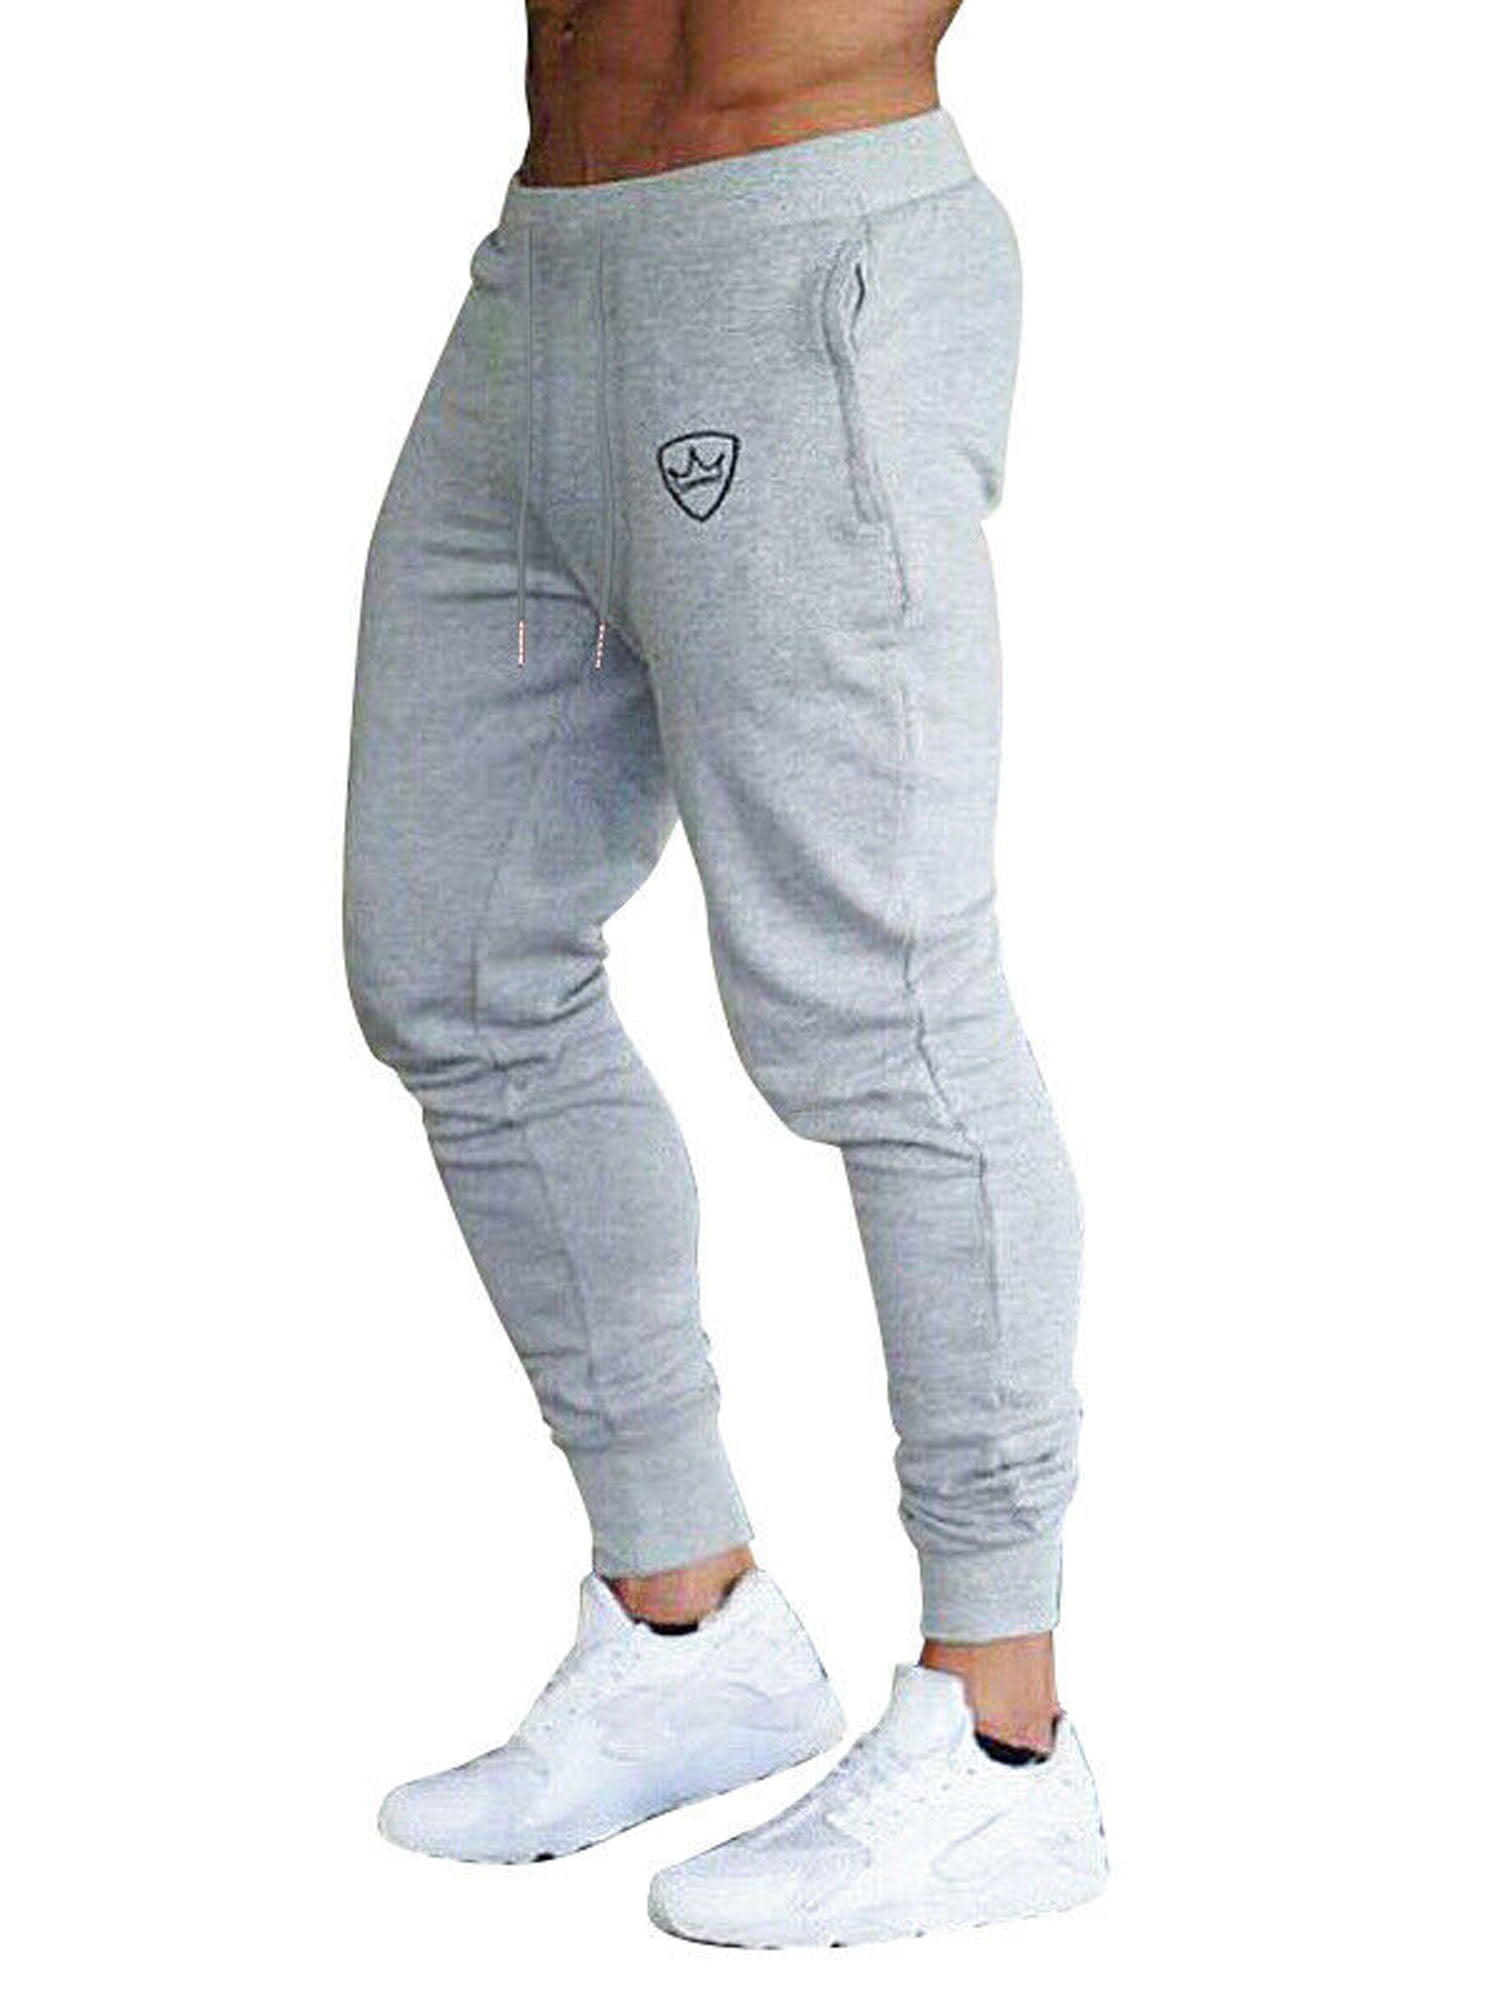 Details about   Gym Mens Slim Fit Tapered Fitness Pants Jogger Sweatpants Workout Pockets Zipper 